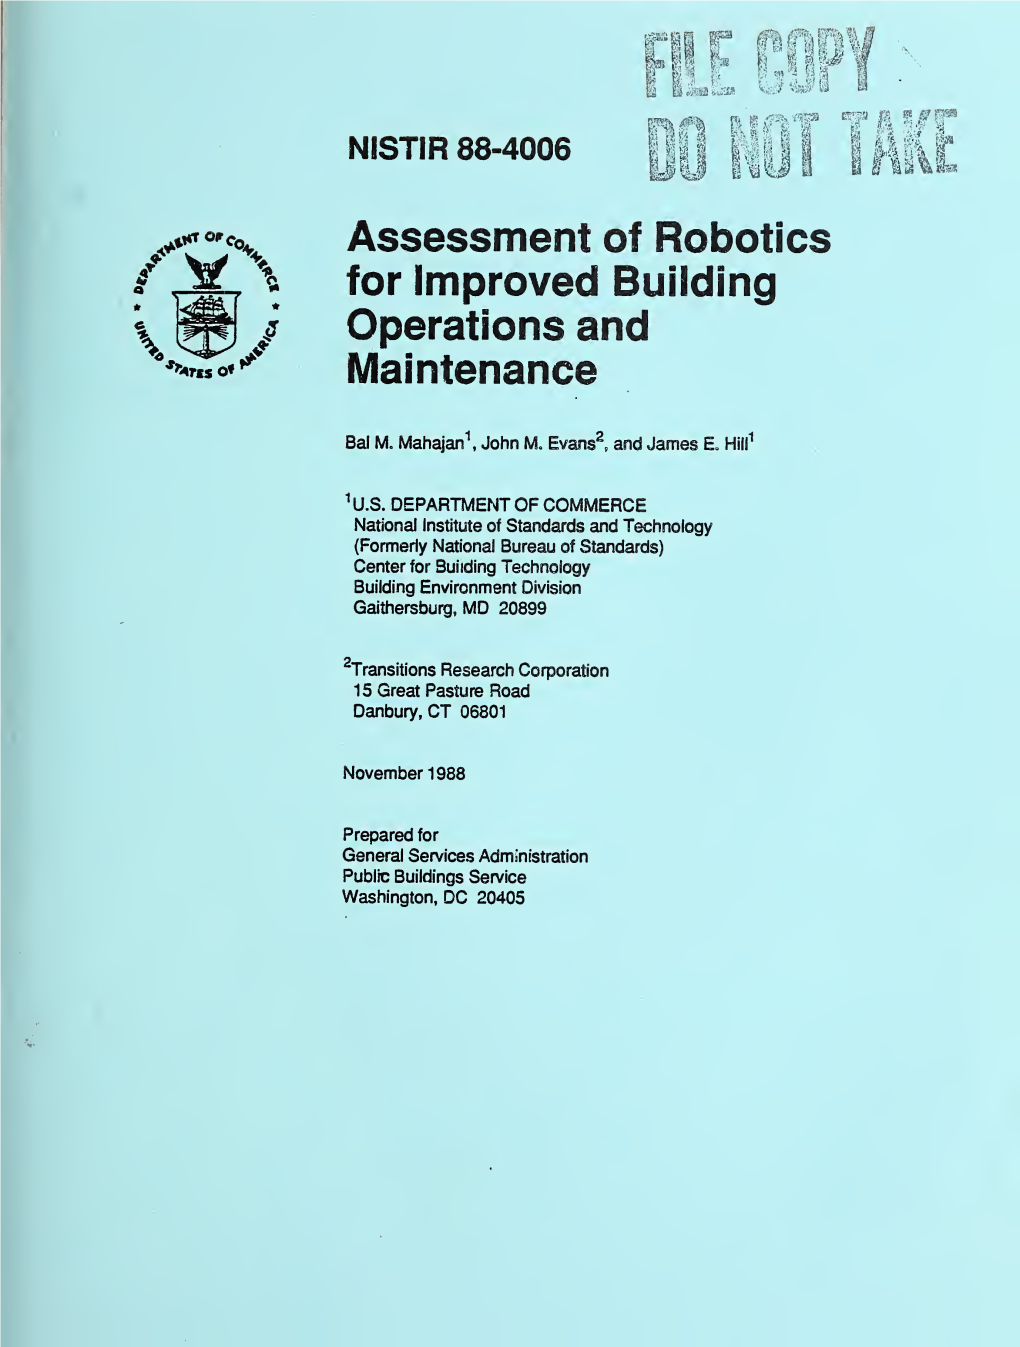 Assessment of Robotics for Improved Building Operations and Maintenance